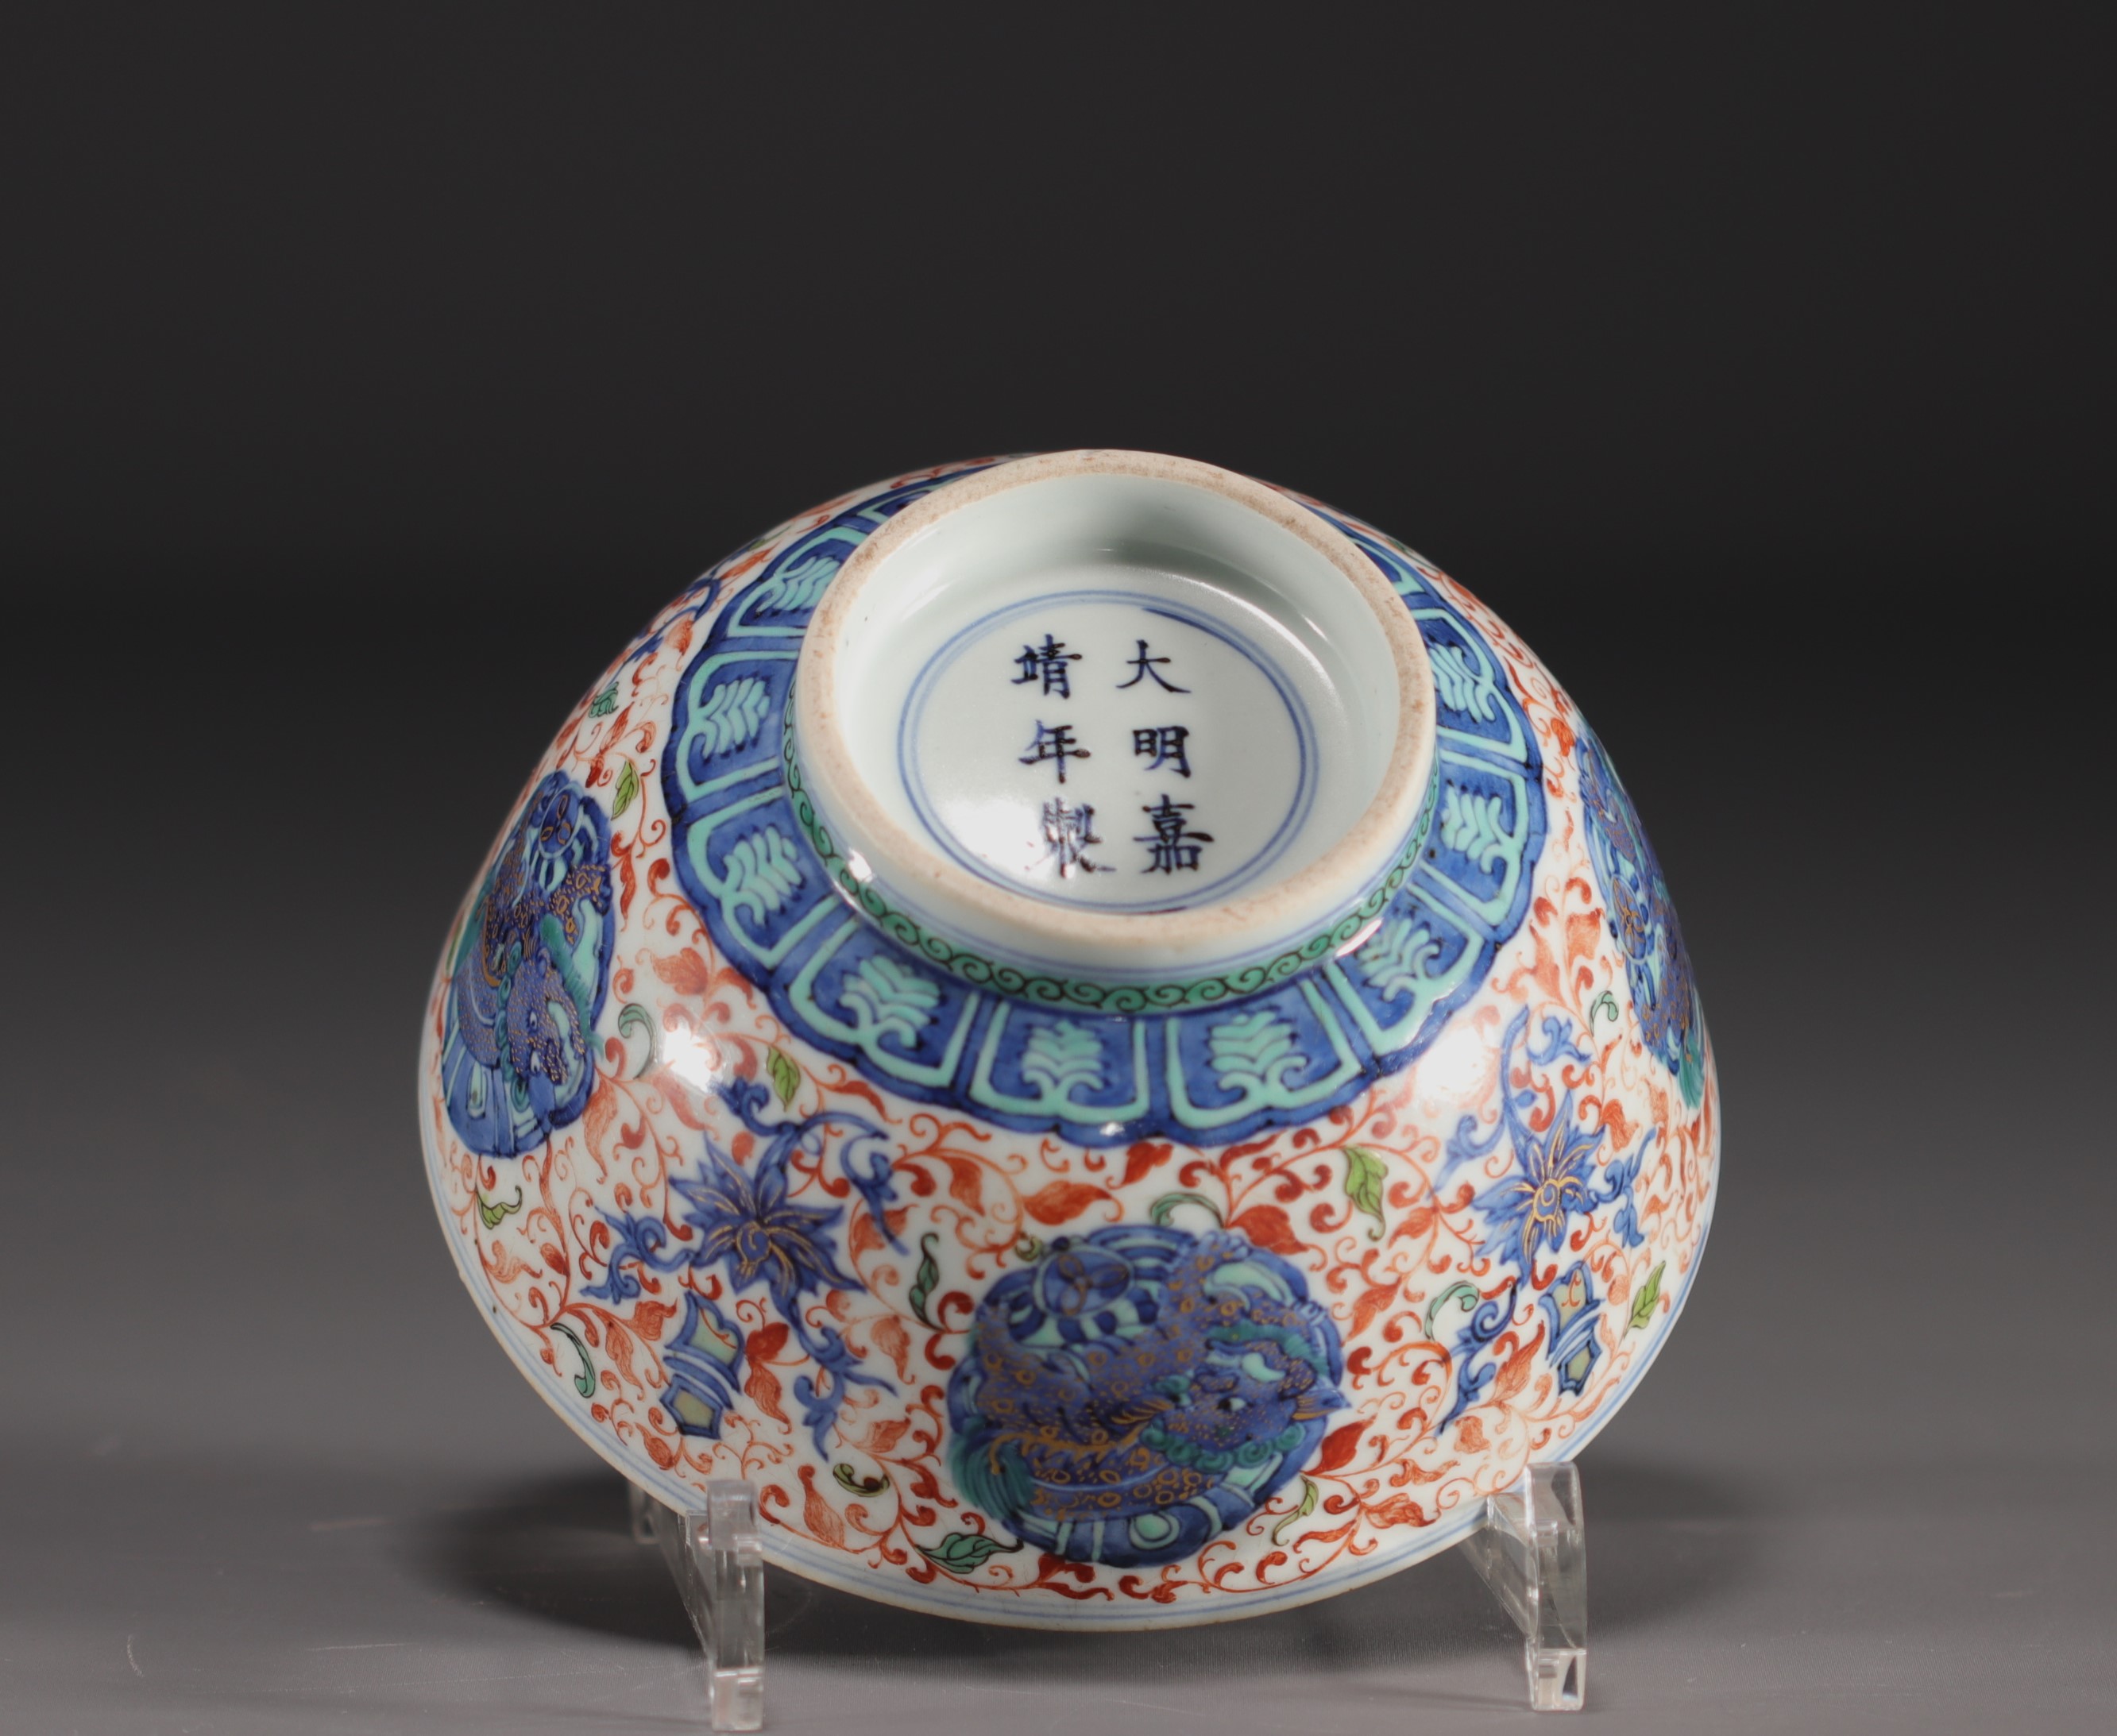 China - Large porcelain bowl decorated with lions in cartouche and flowers, Ming mark. - Image 8 of 8